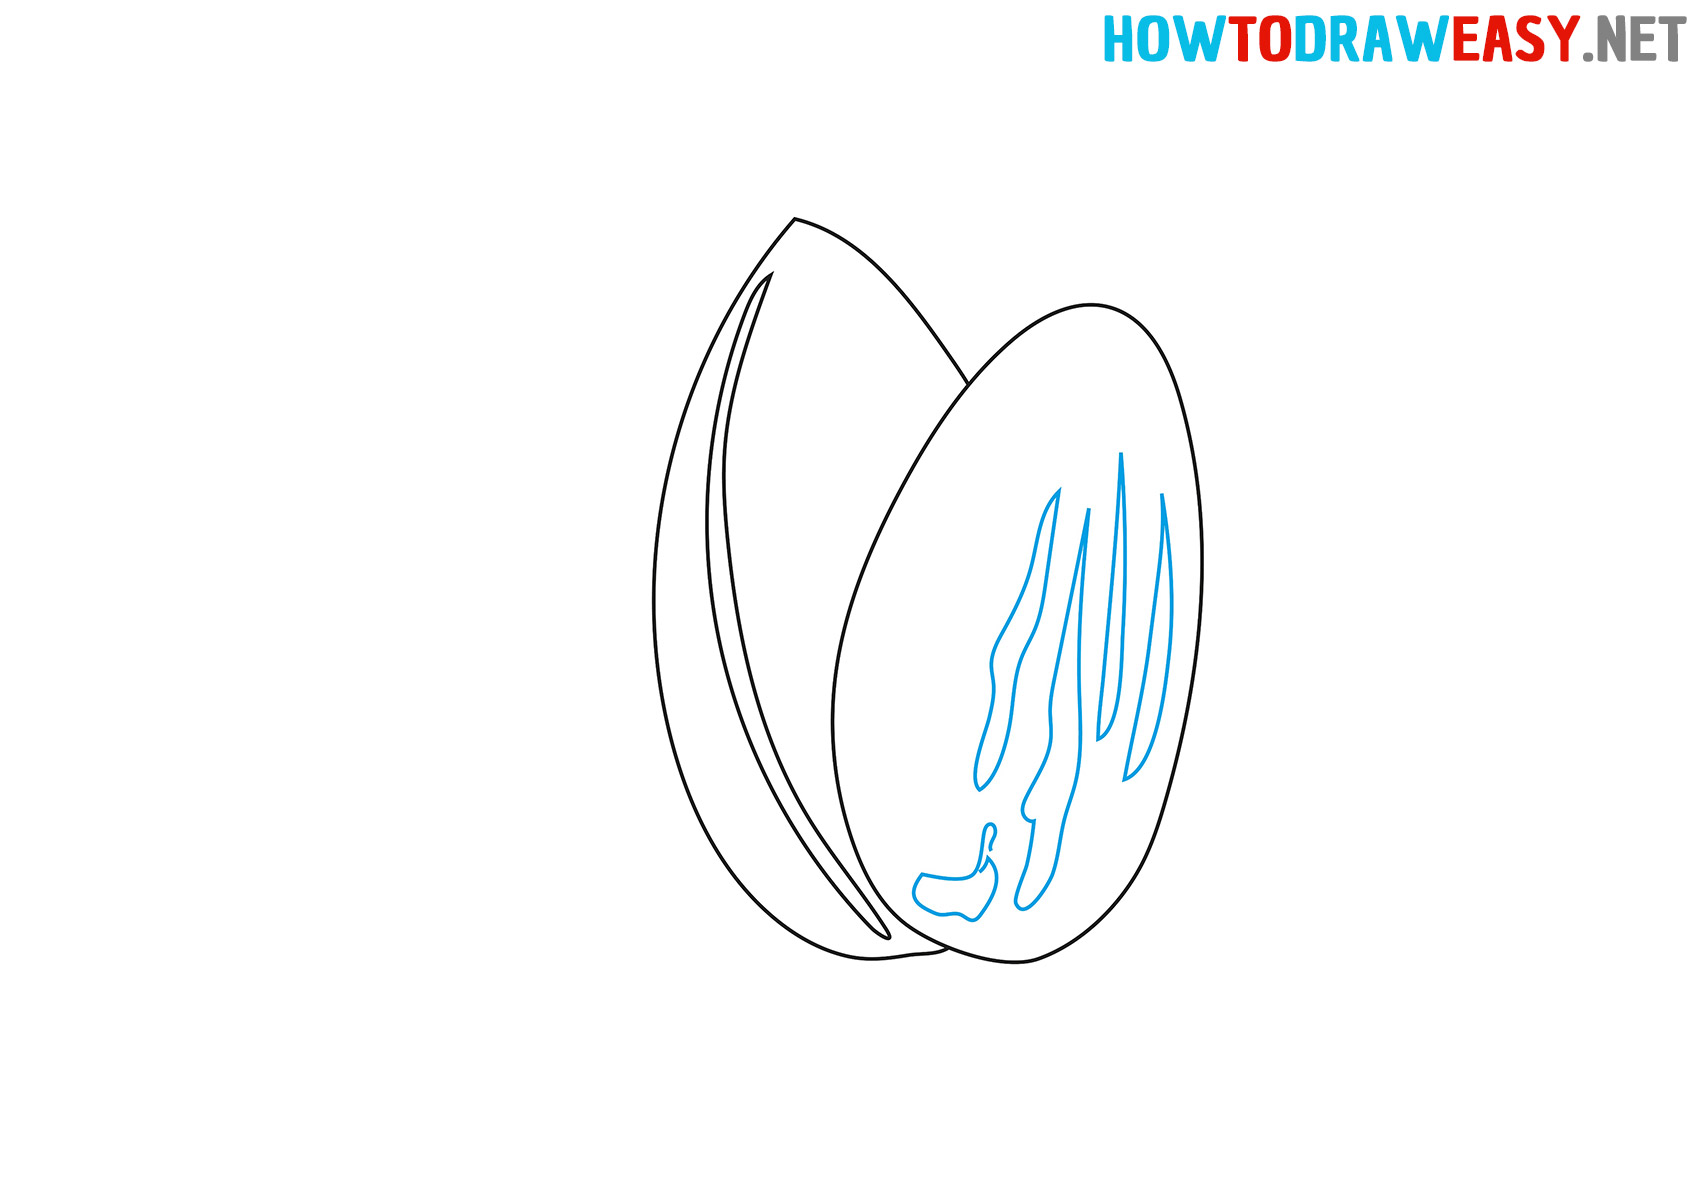 How to Draw a Simple Almond